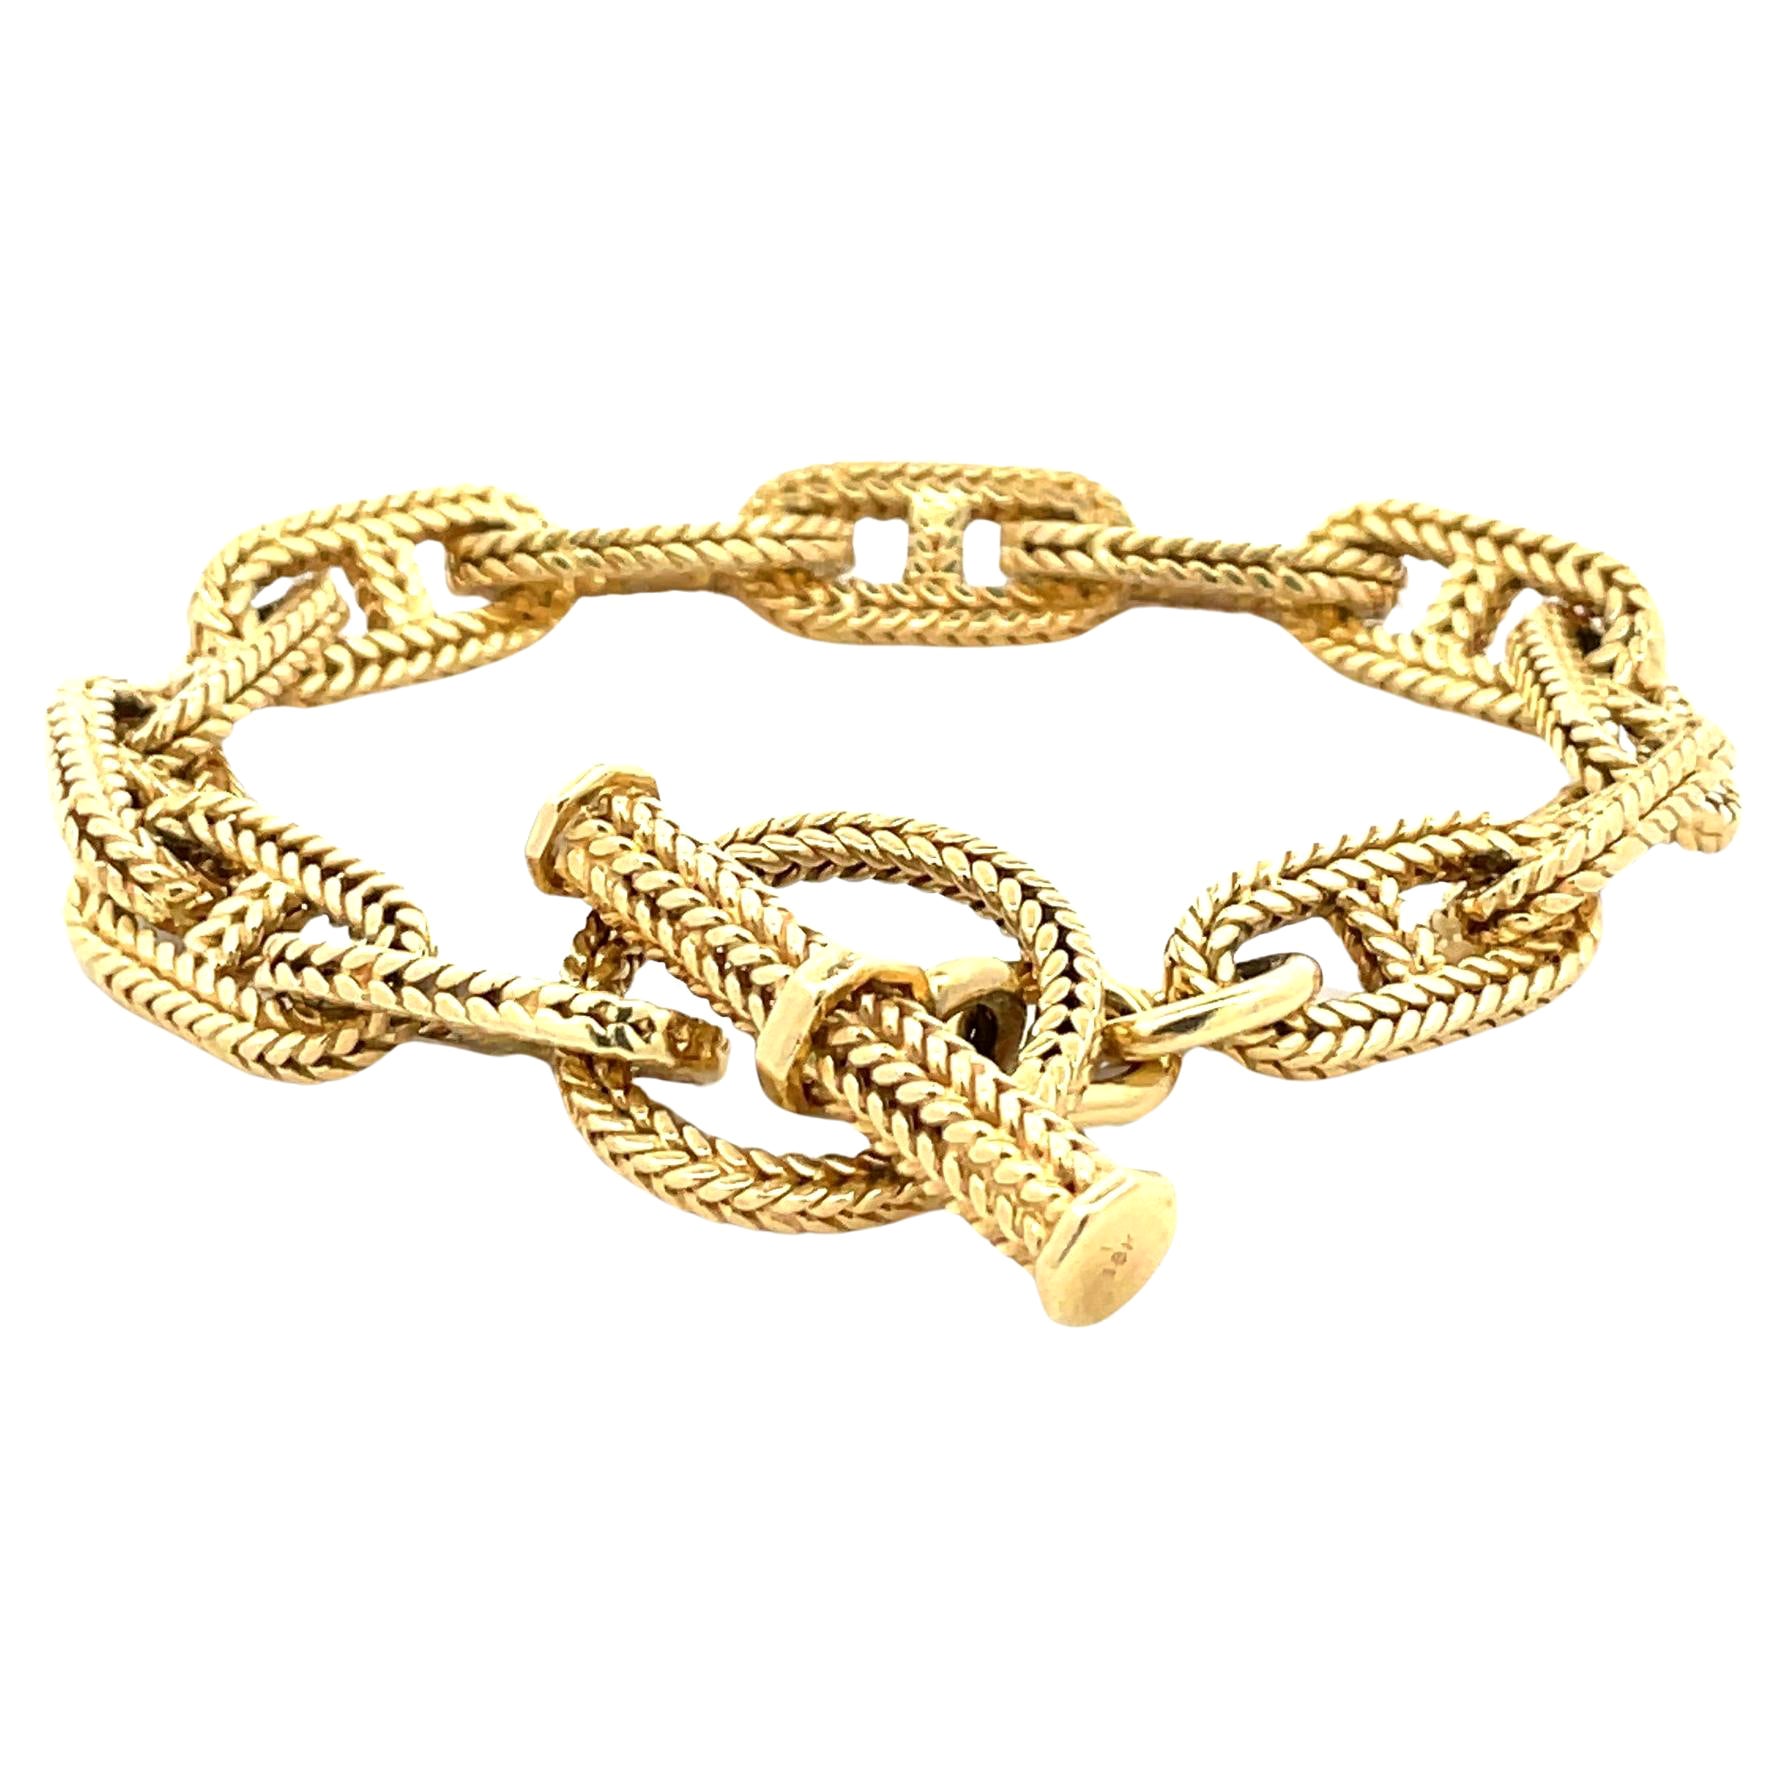 Vintage Style "Chaine d'ancre" Small Link Bracelet in 18 Karat Yellow Gold For Sale